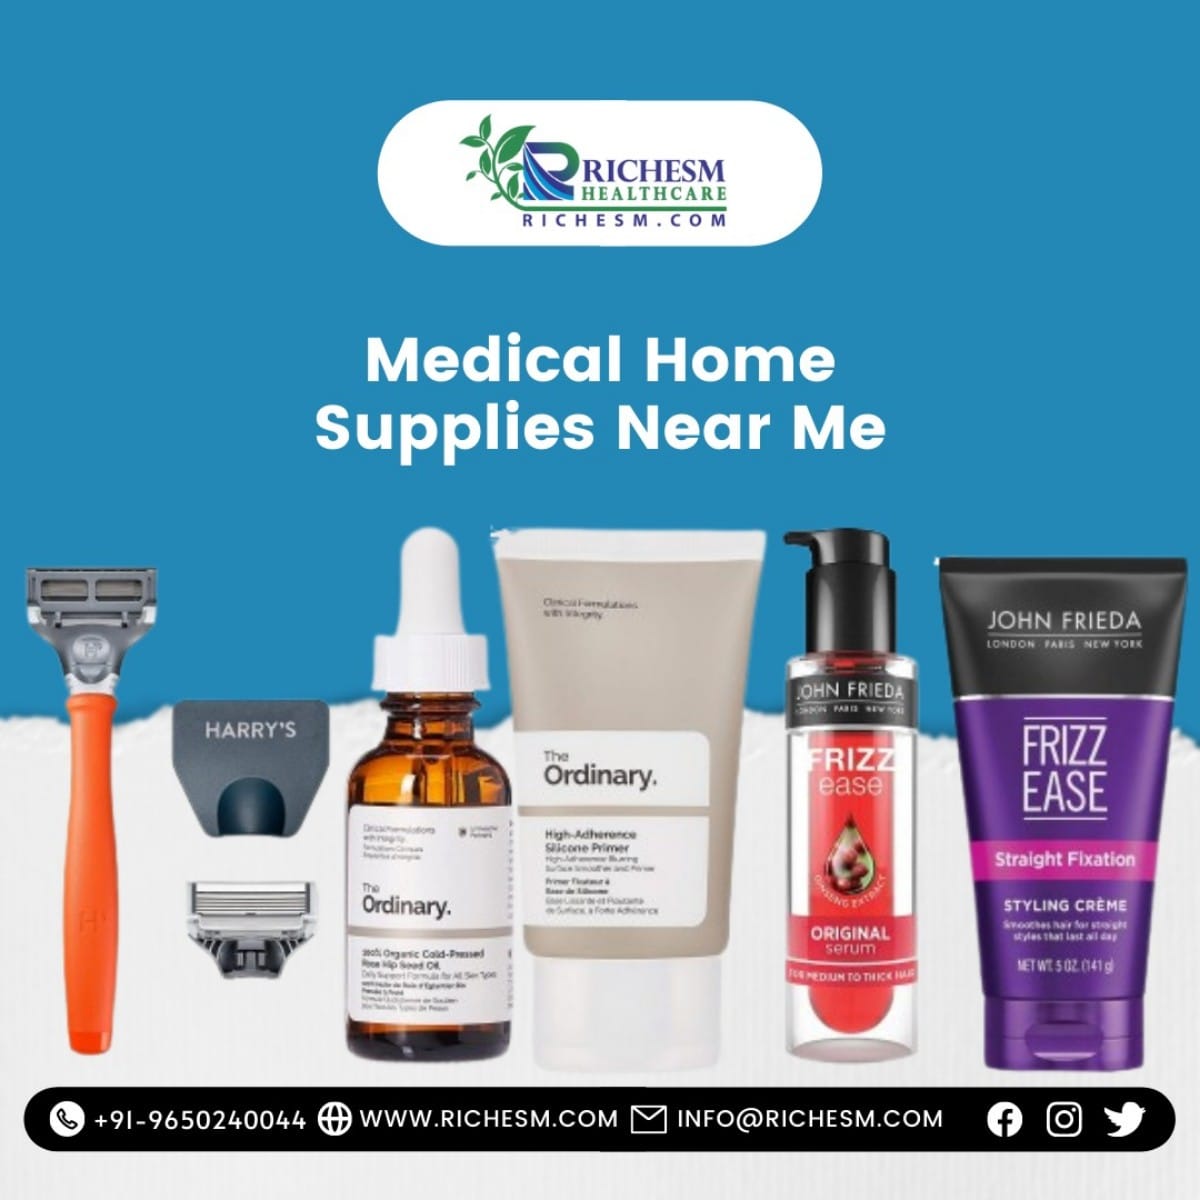 Medical Home Supplies Near Me Health and Nutrition Medical Supplies Near Me